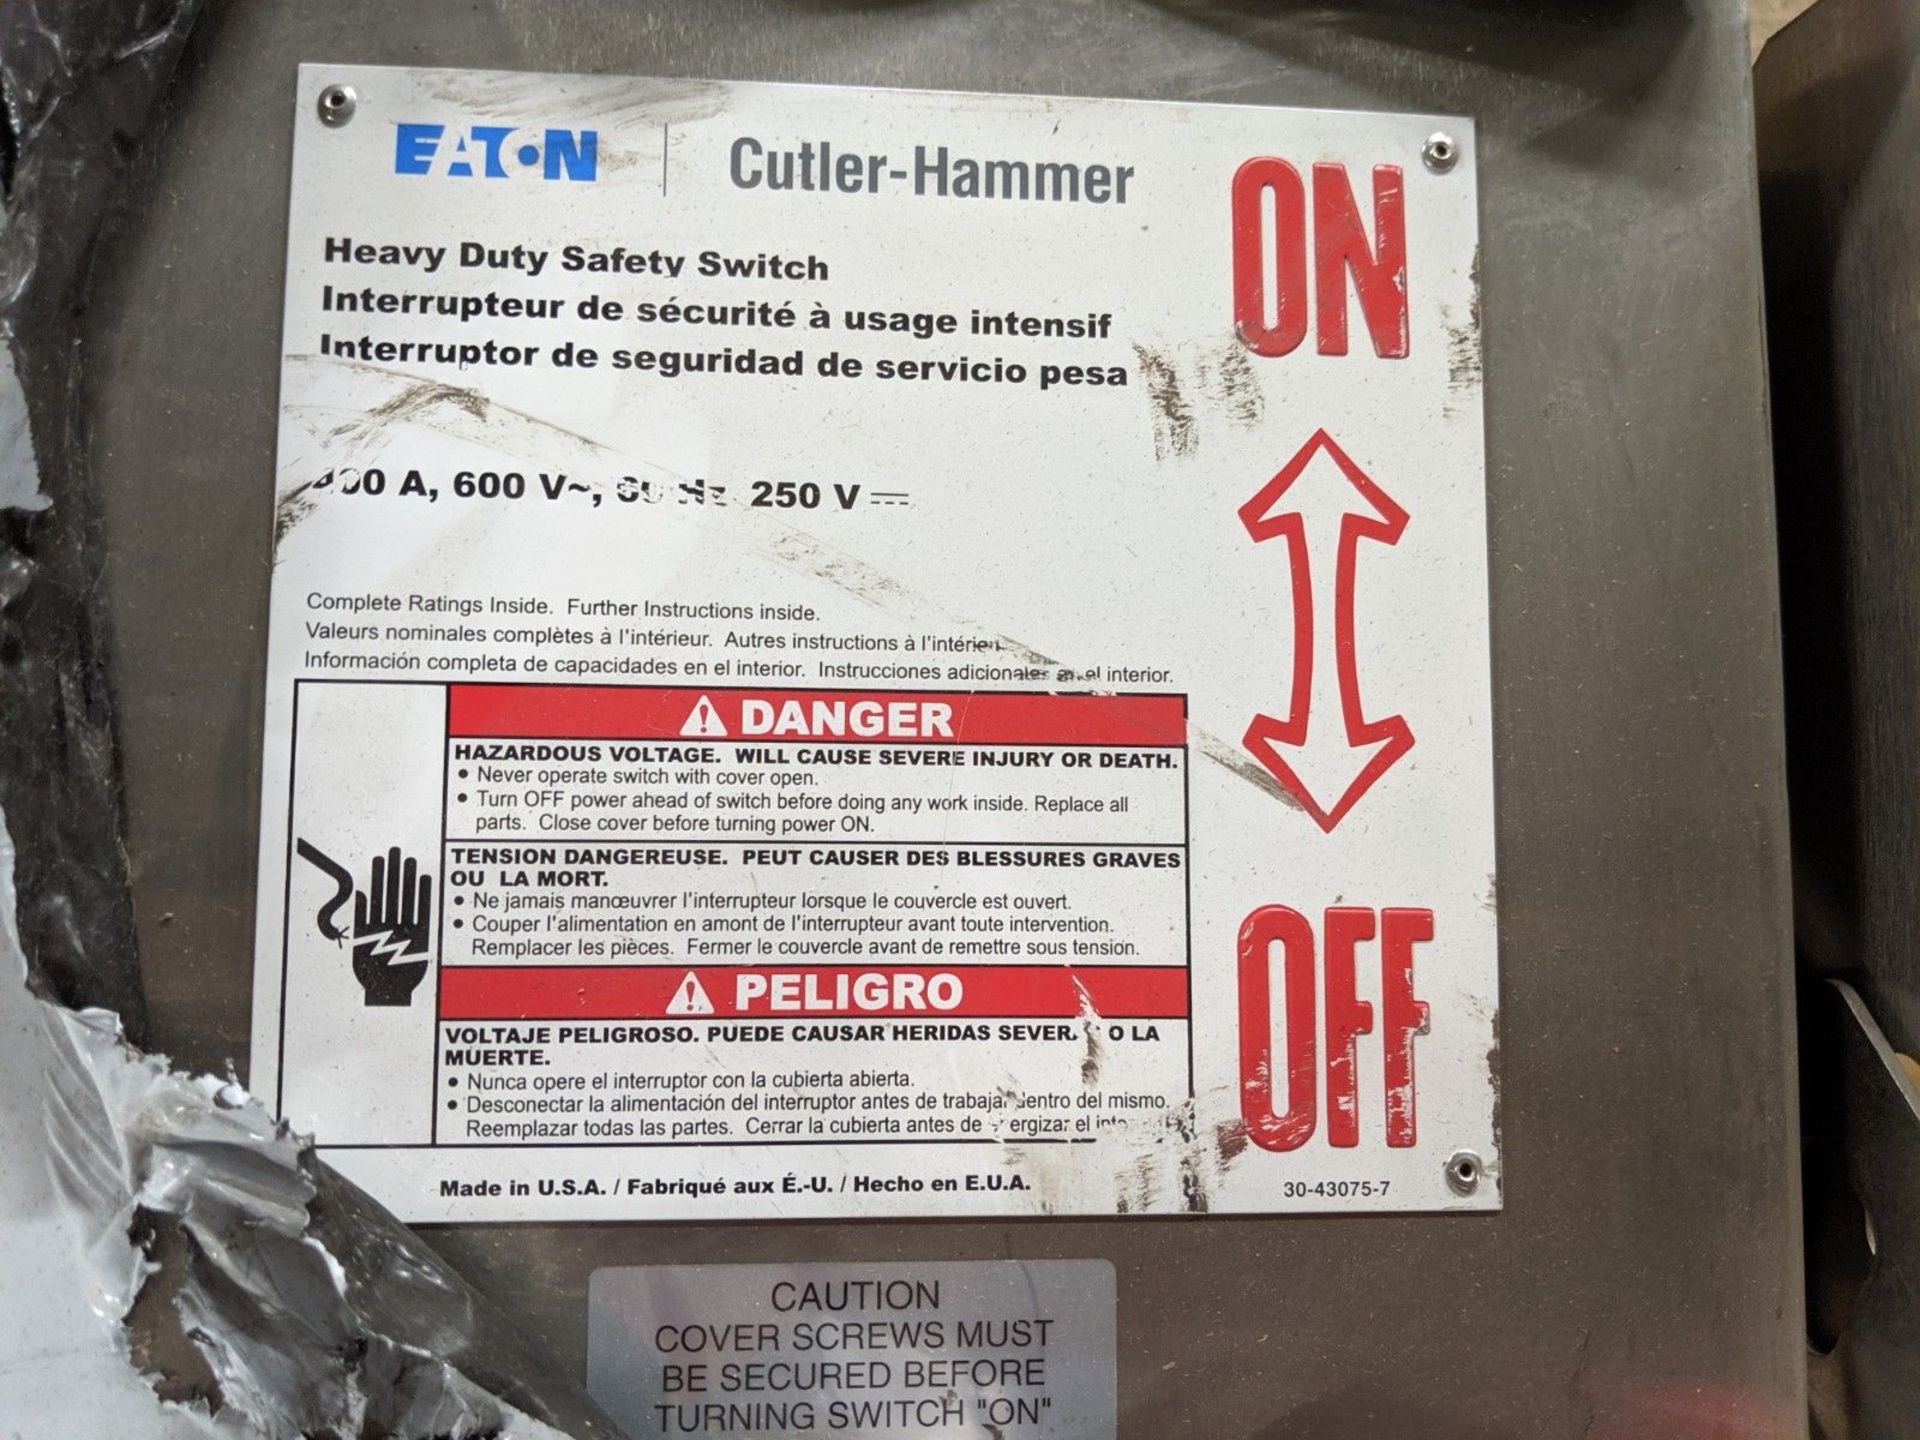 EATON 400 AMP STAINLESS STEEL, WATER-TIGHT H.D. SAFETY SWITCH DISCONNECT, 600 VOLT, CAT # DH365UWK - Image 2 of 4